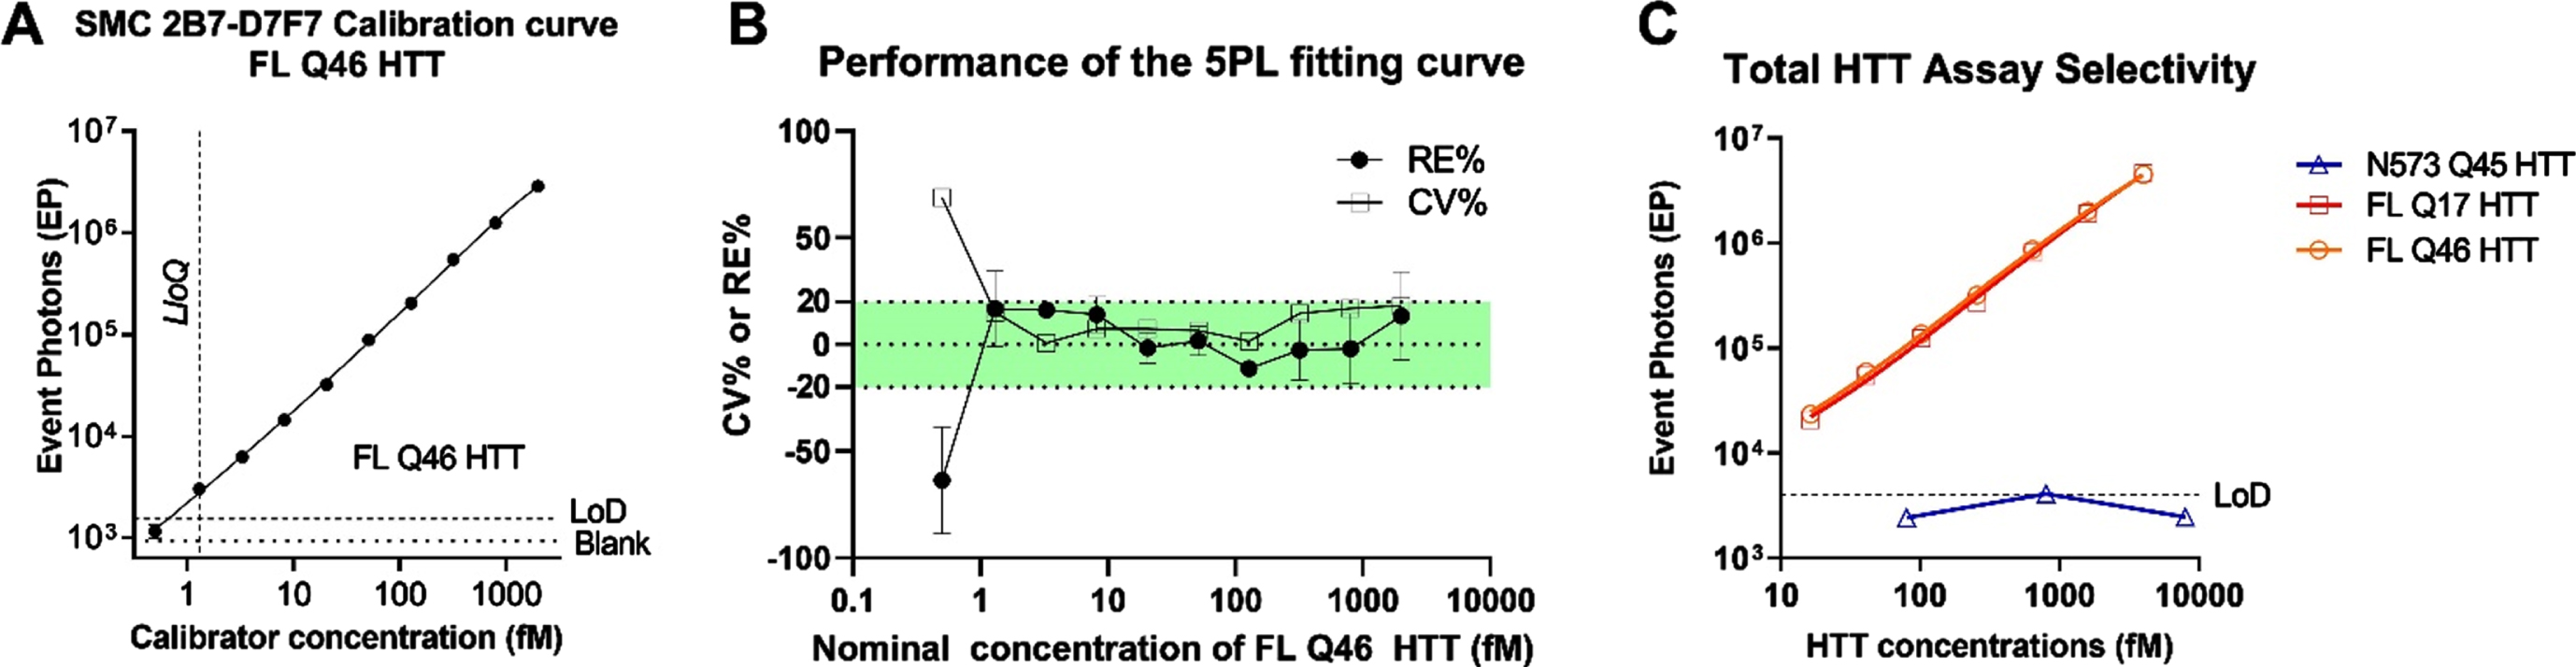 A) Calibration curve of the CHDI_HTT_143 (2B7-D7F7) SMC assay. The FL Q46 HTT was used as calibrator for the CHDI_HTT_143 (2B7-D7F7) SMC assay, and the points were fitted with a 5LP logistic regression. The limit of detection (LoD) was calculated as the average of blanks plus three standard deviations. All values are reported as the average and standard deviation of three technical replicates. B) CV% and RE% of the calculated concentrations with respect to the nominal ones for all calibrator concentrations. The green shaded area represents the acceptance criteria zone (±20% RE% and CV%). All values are reported as the average and standard deviation of three technical replicates. C) Polyglutamine length-independence and FL HTT selectivity of the CHDI_HTT_143 (2B7-D7F7) SMC assay; the N573 Q45 HTT calibrator was used at three representative concentrations spanning the dynamic range. All samples are reported as the average and standard deviation of three technical replicates.